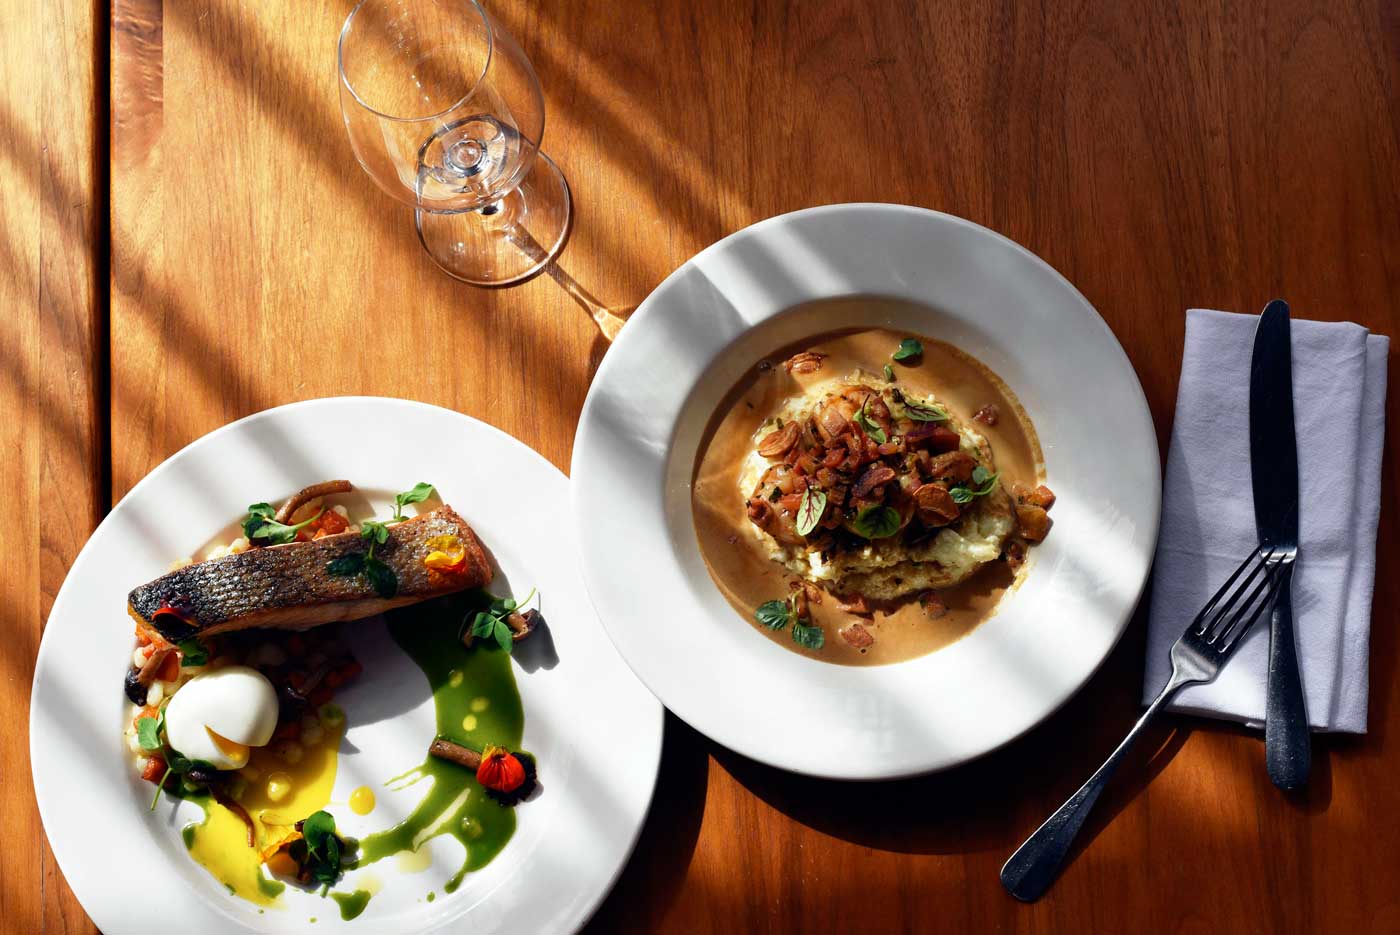 Fresh dishes like the salmon complement traditional dishes like shrimp and grits at 1300 on Fillmore